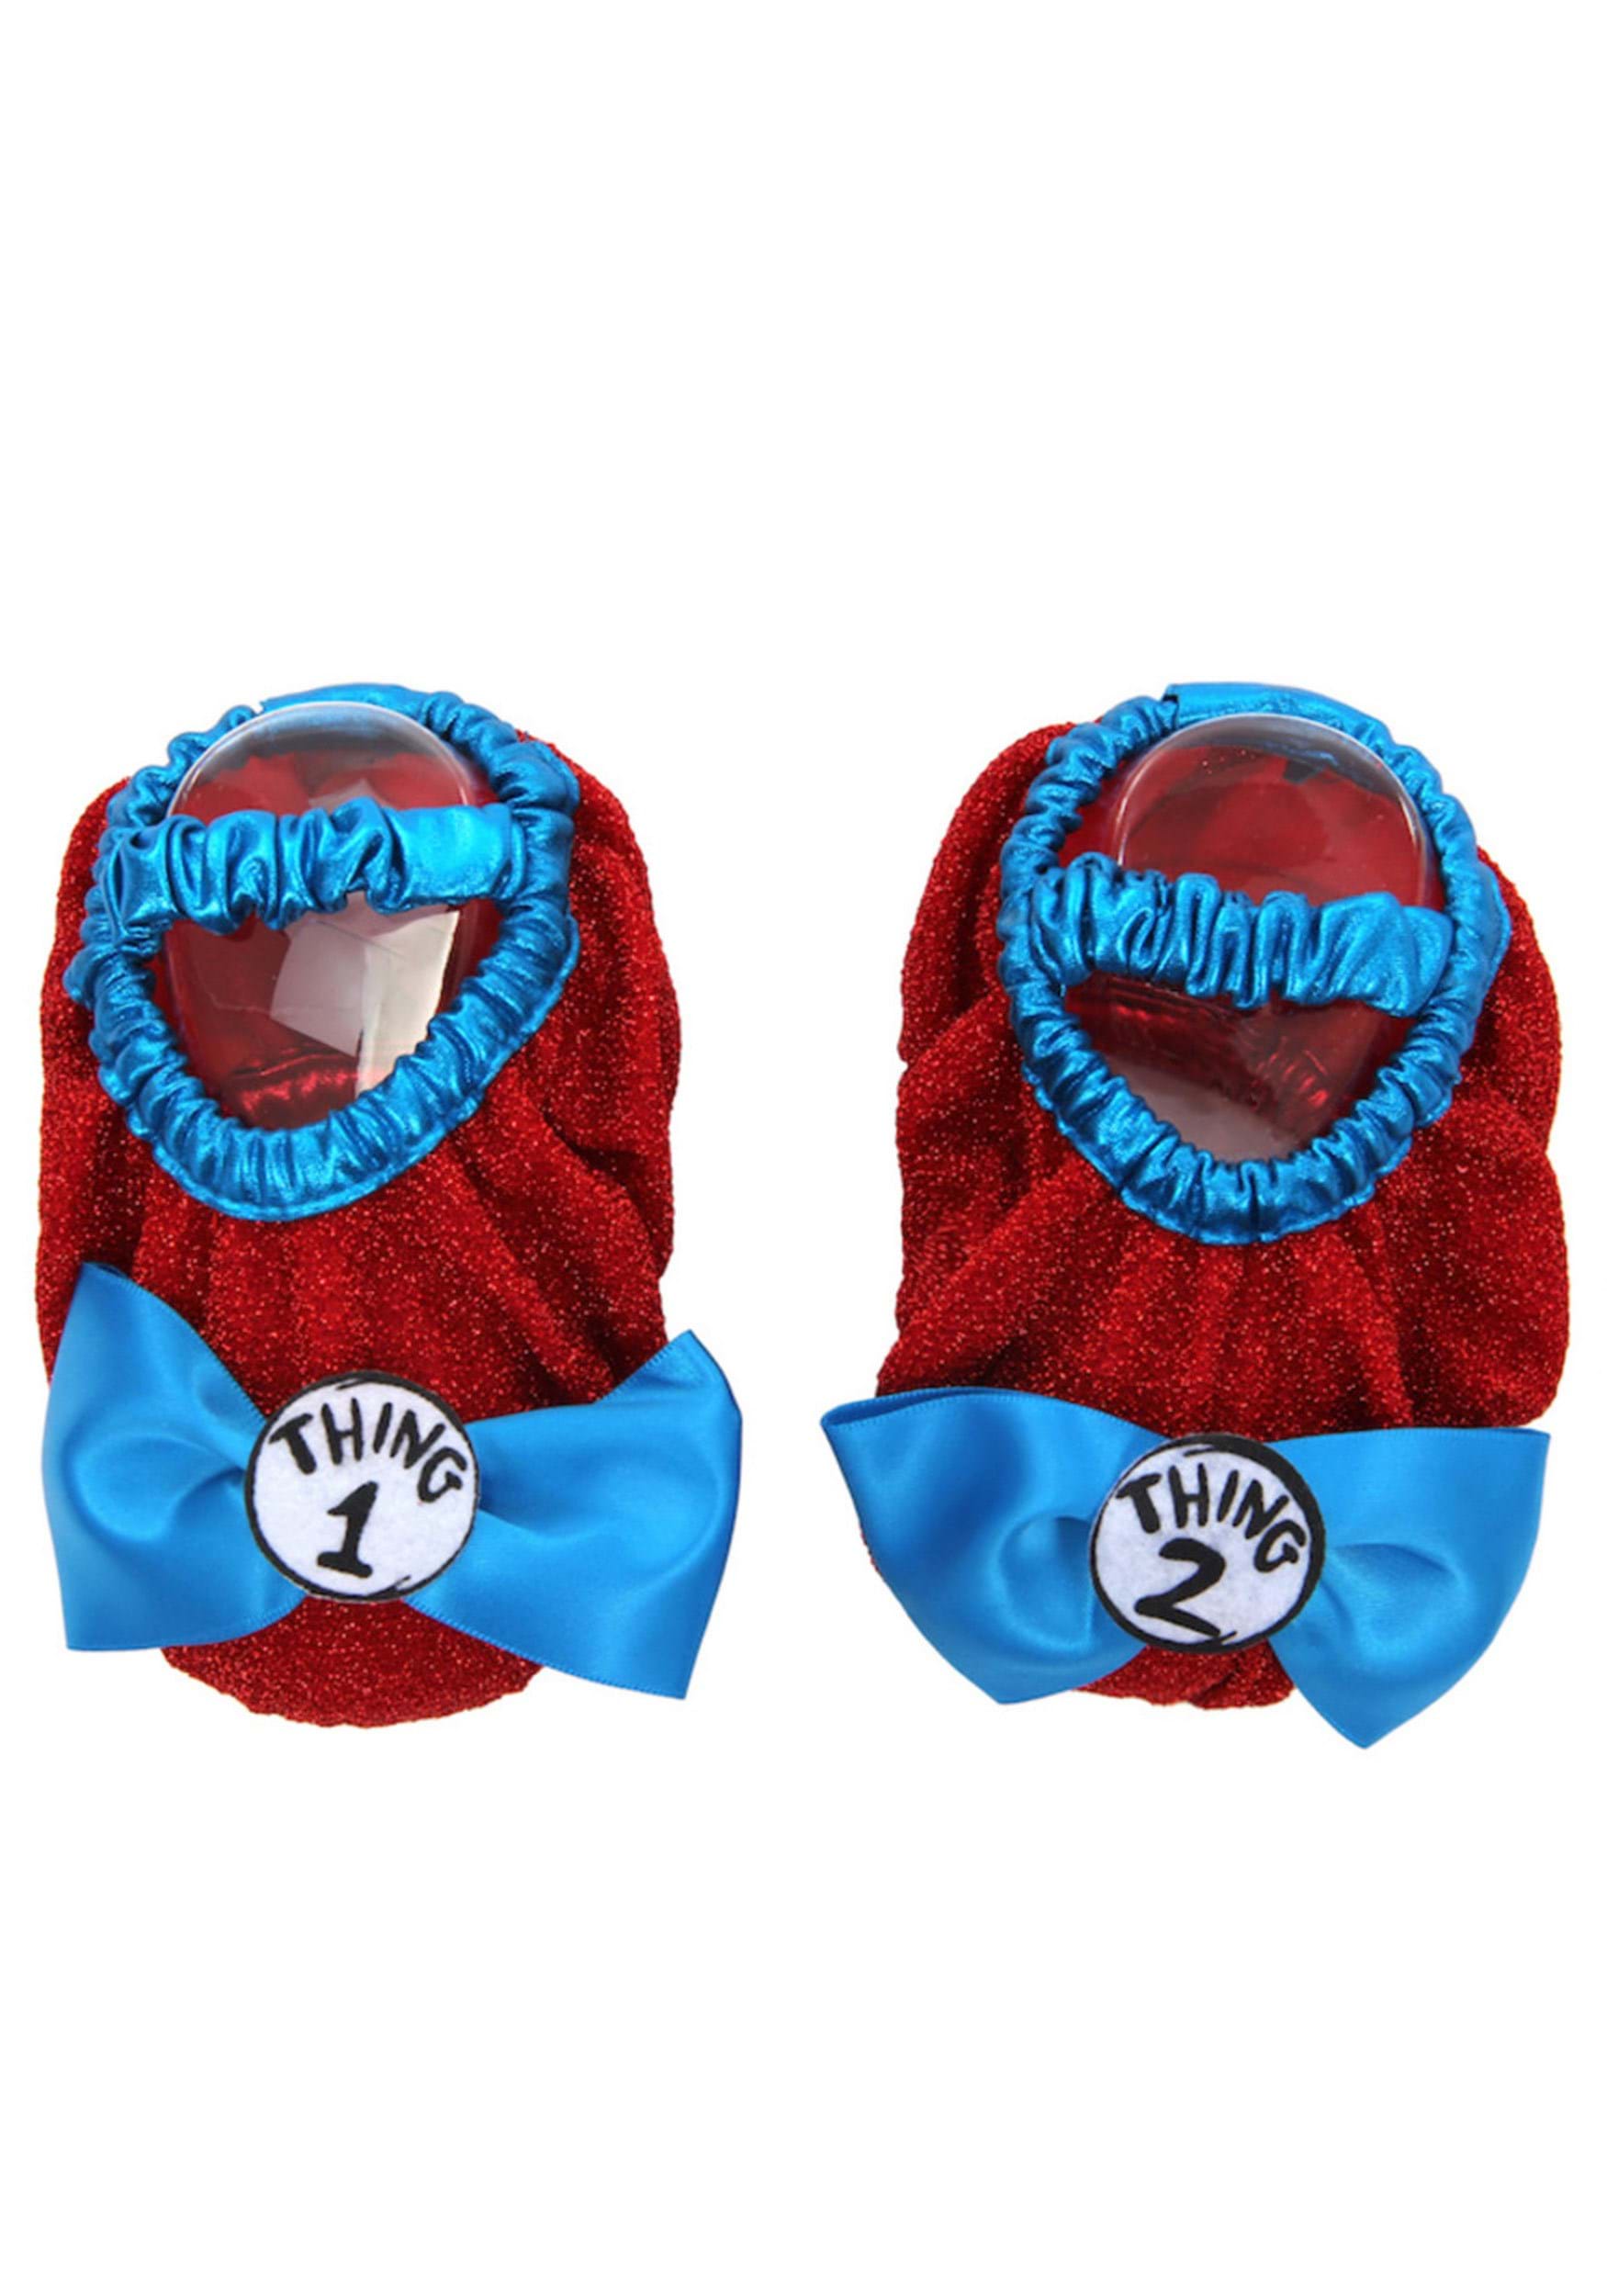 Thing 1 & 2 from Cat in the Hat Kids Costume Shoe Covers Red Sparkle Shiny